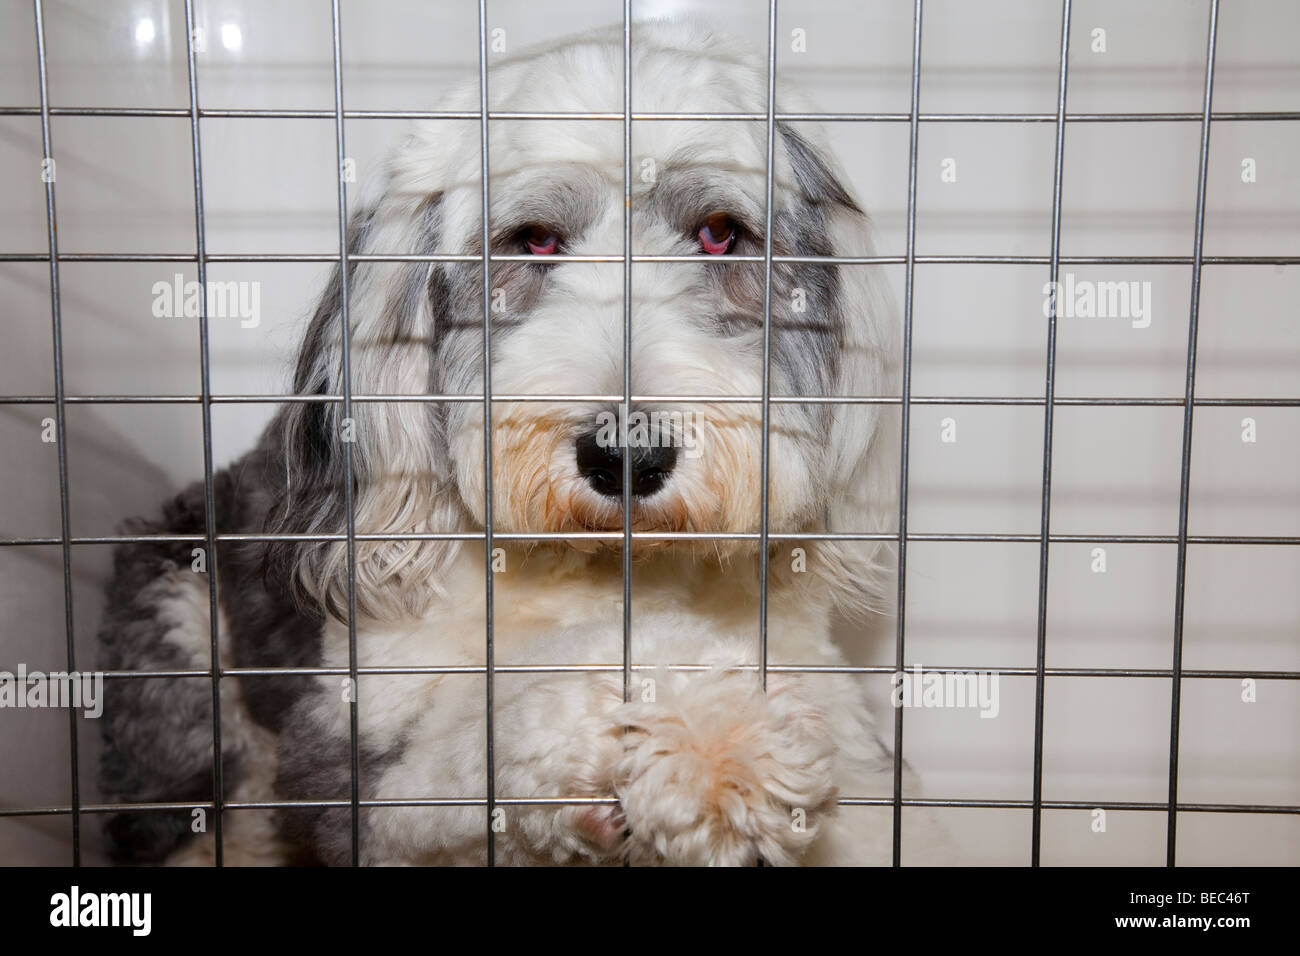 Old English Sheepdog in Kennel at Veterinary Clinic Stock Photo